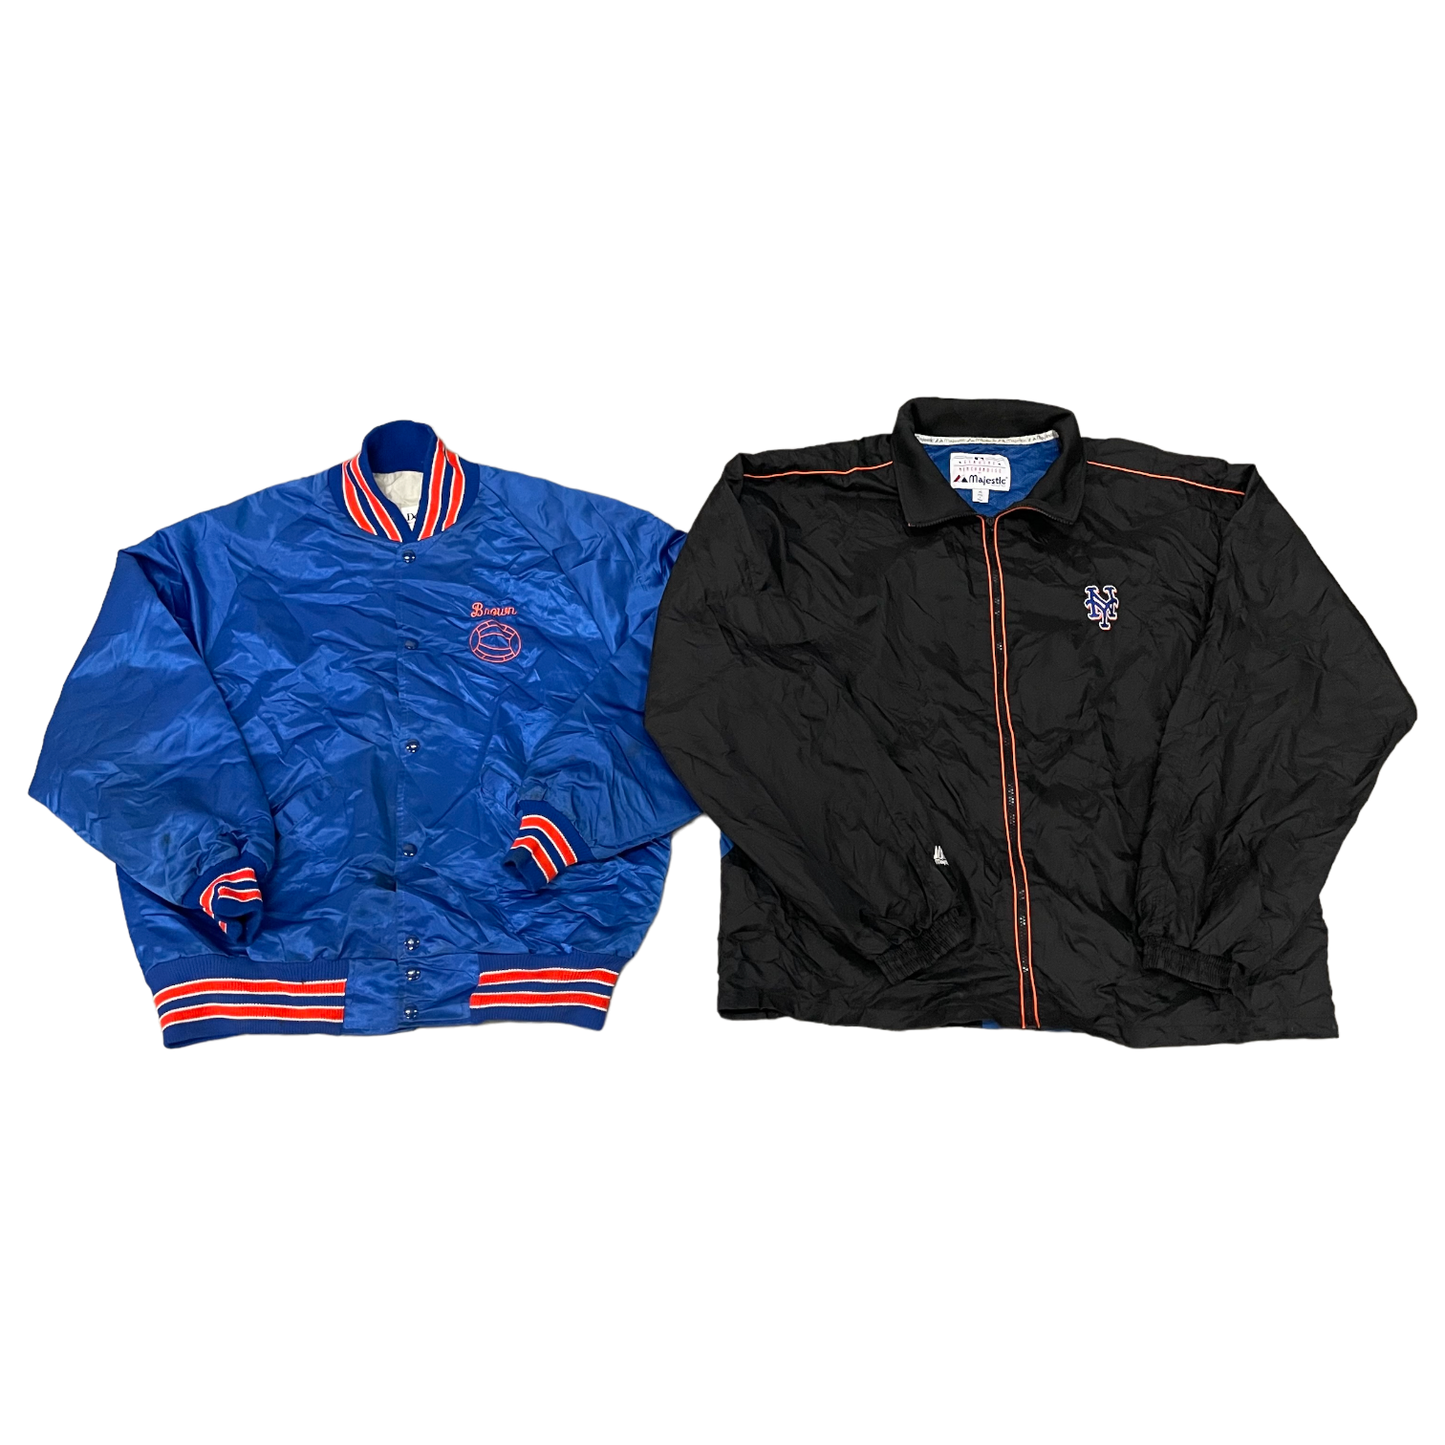 Pro Sports team Jackets-FOR SALE IN THE WAREHOUSE ONLY: Bulk